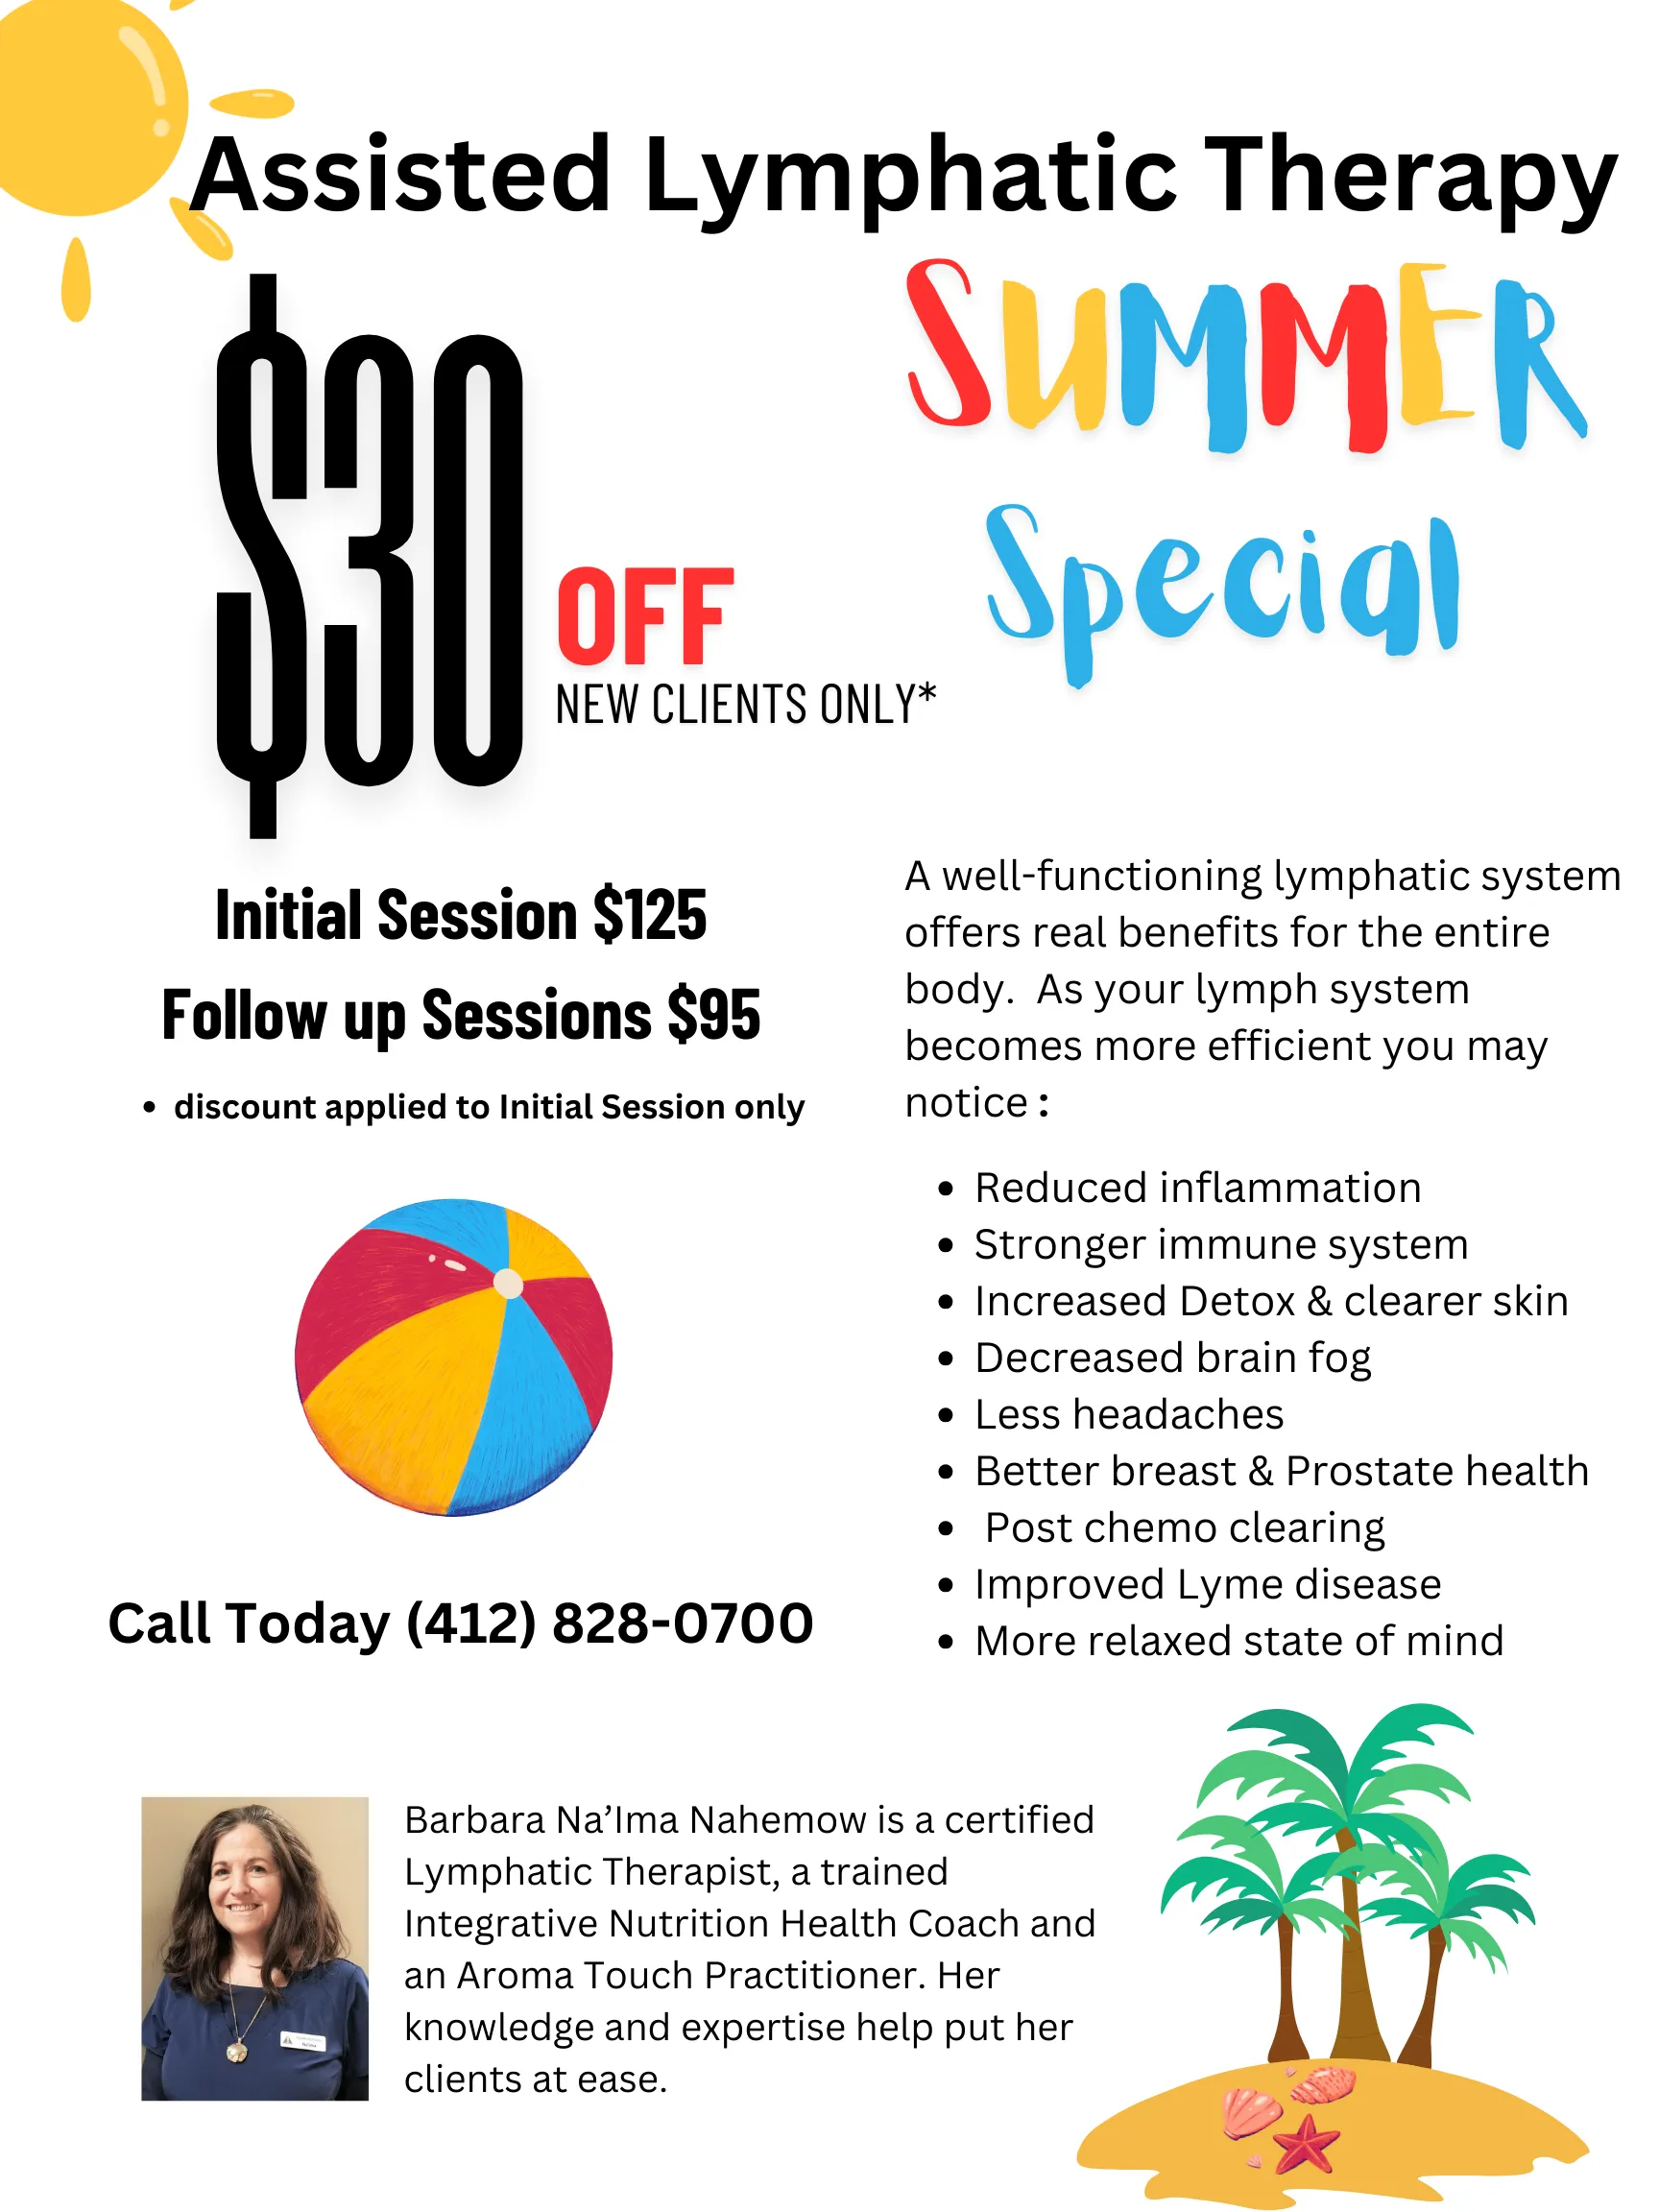 Assisted Lymphatic Therapy Summer Special